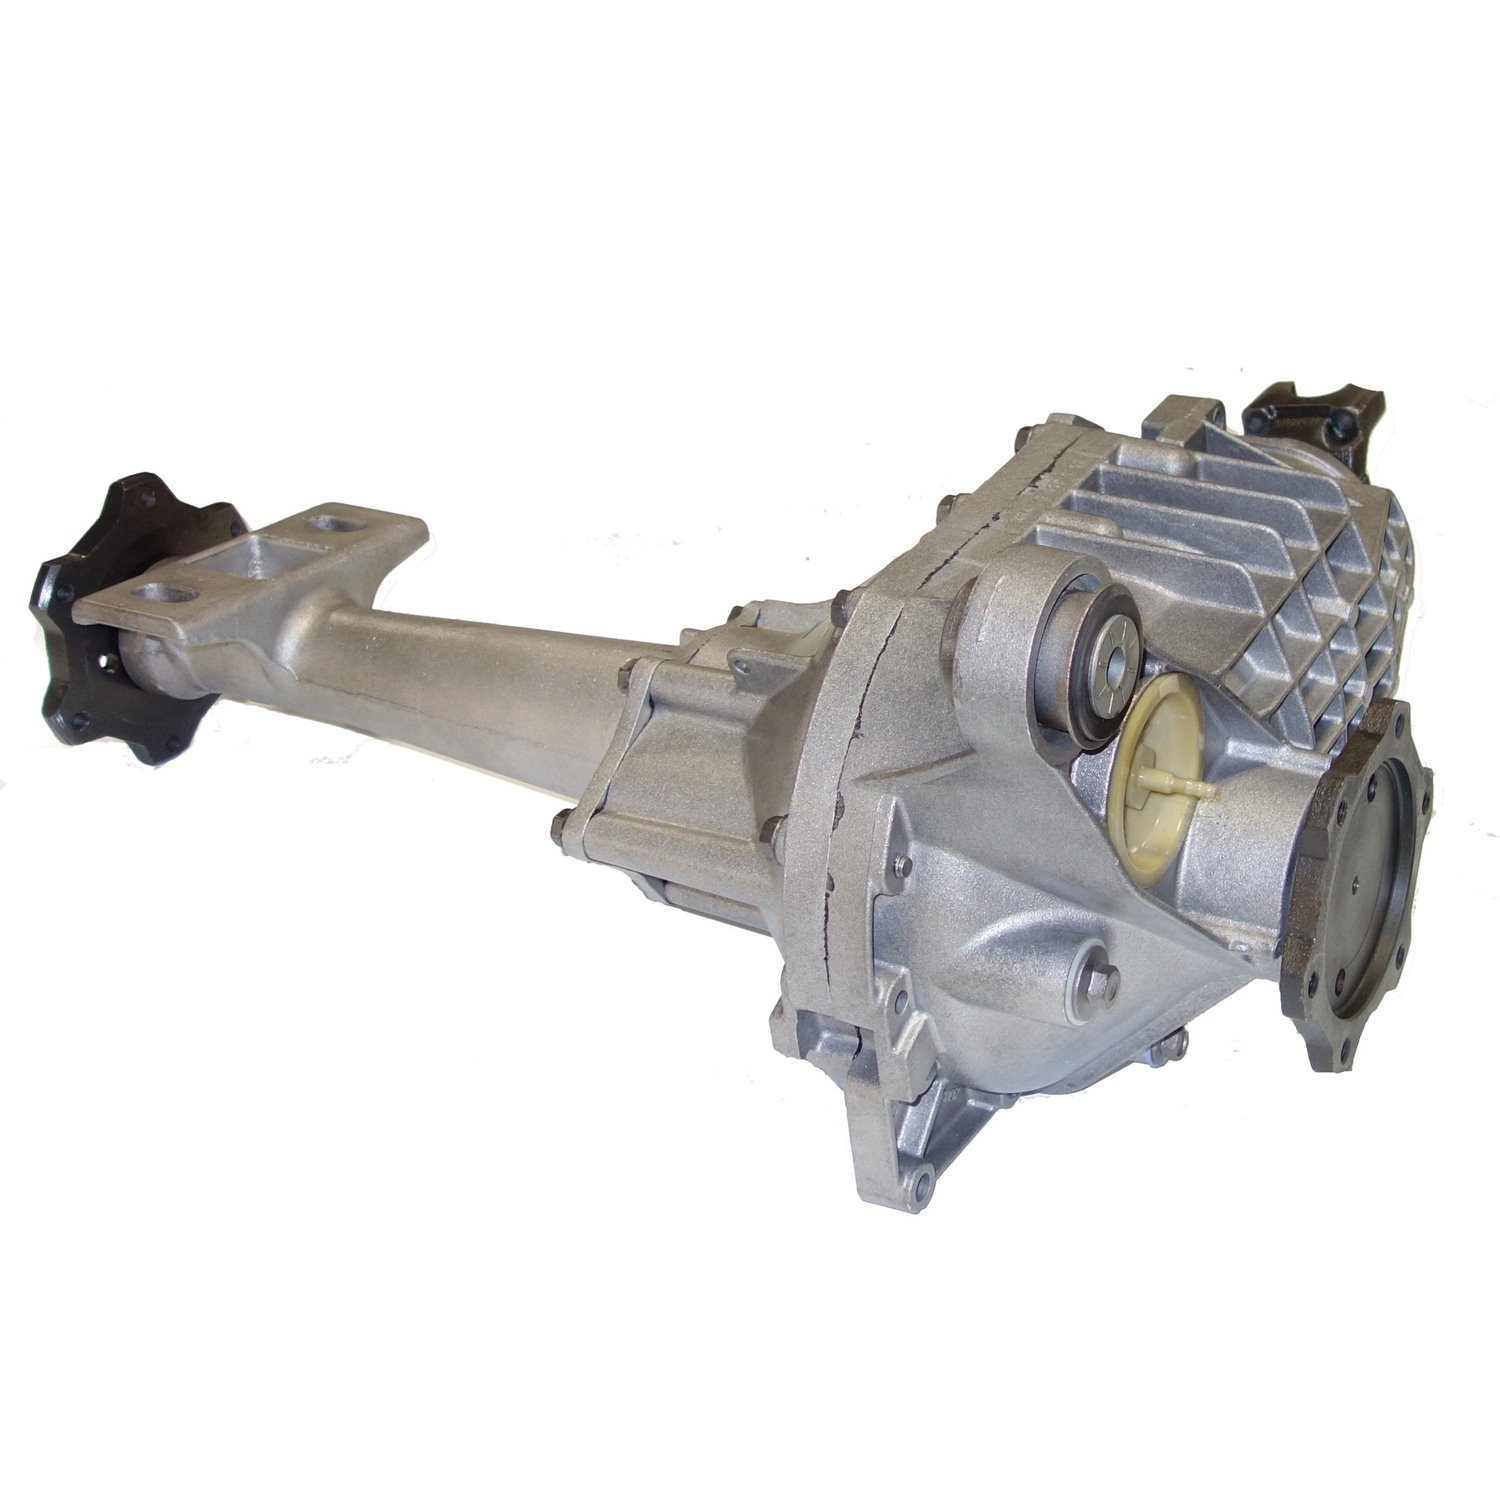 Remanufactured Axle Assembly for GM 8.25" 2001-2006 GM 1500 3.73 Ratio, AWD